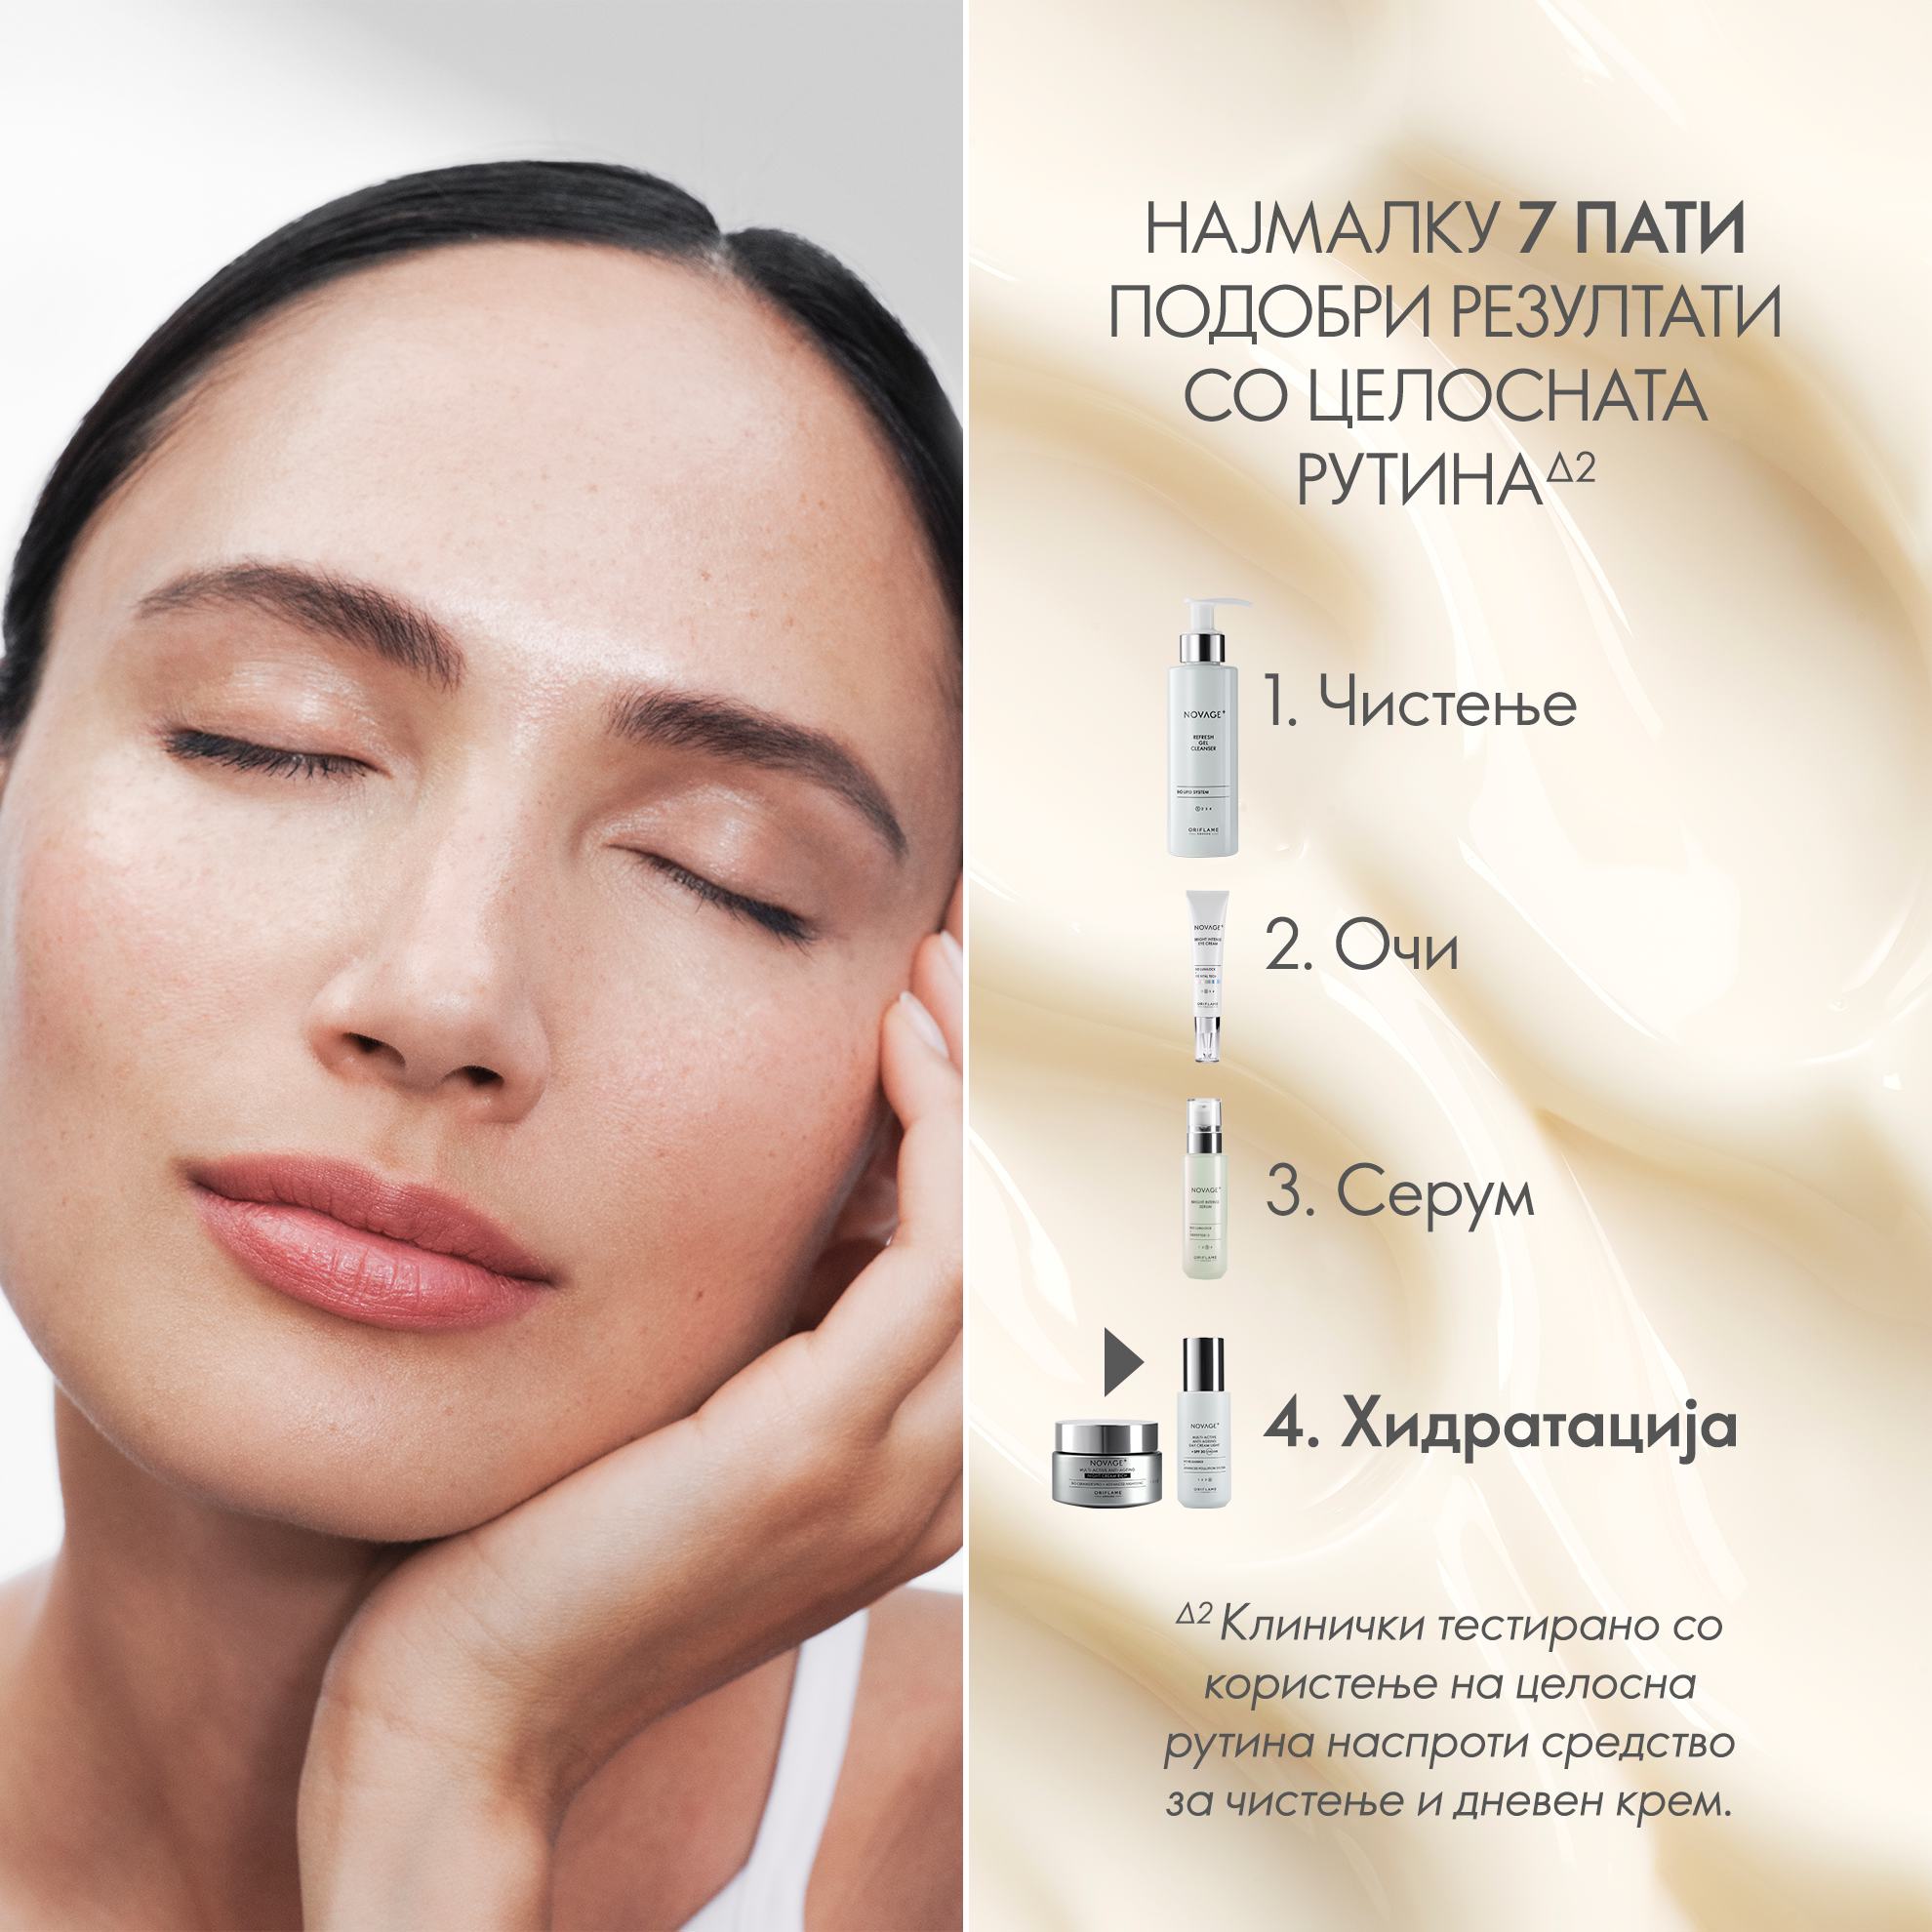 https://media-cdn.oriflame.com/productImage?externalMediaId=product-management-media%2fProducts%2f41043%2fMK%2f41043_5.png&id=17583810&version=2